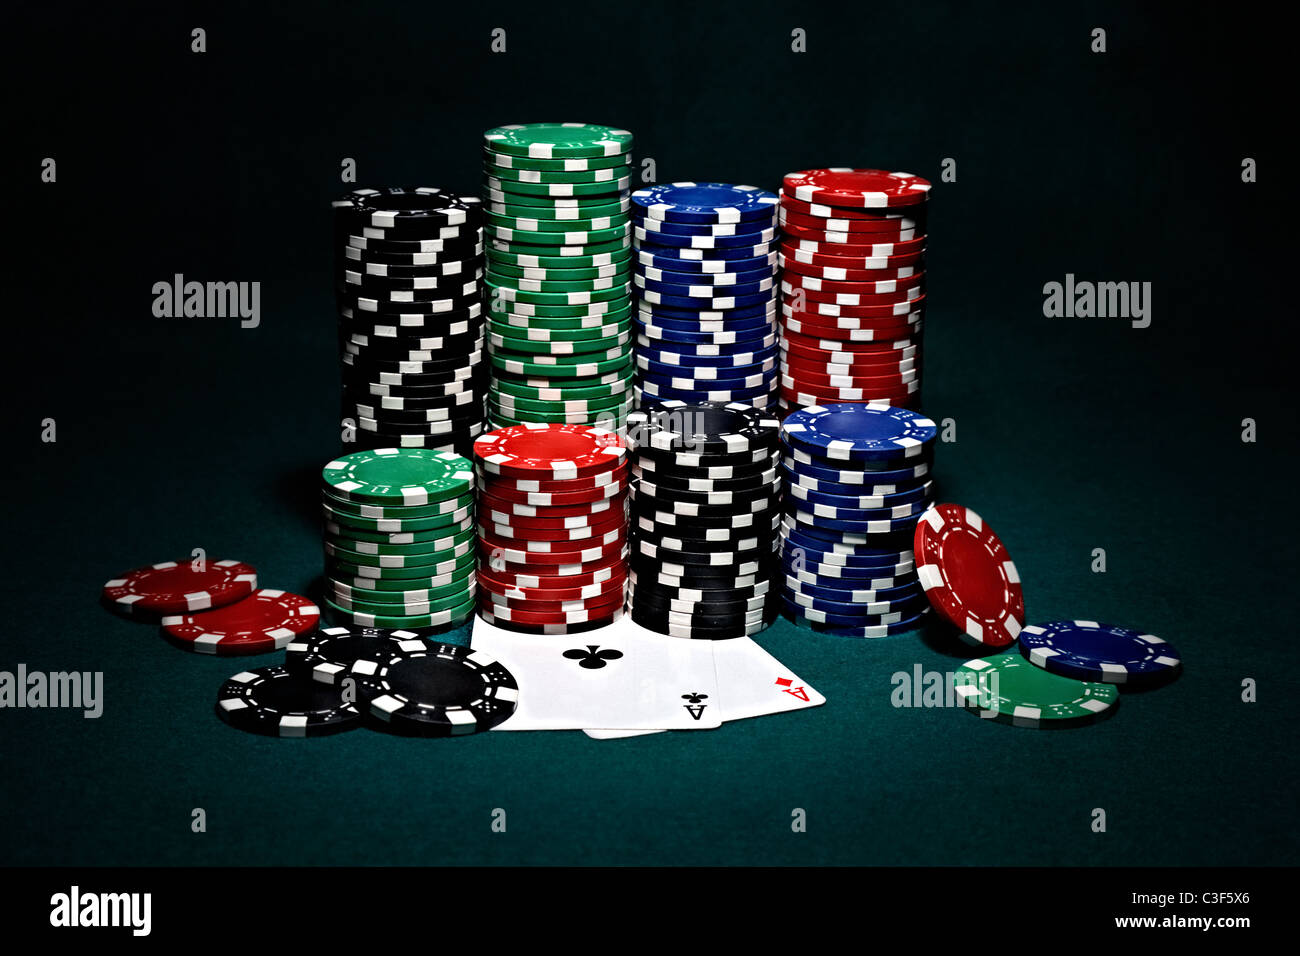 stacks-of-chips-for-poker-with-pair-of-aces-C3F5X6.jpg